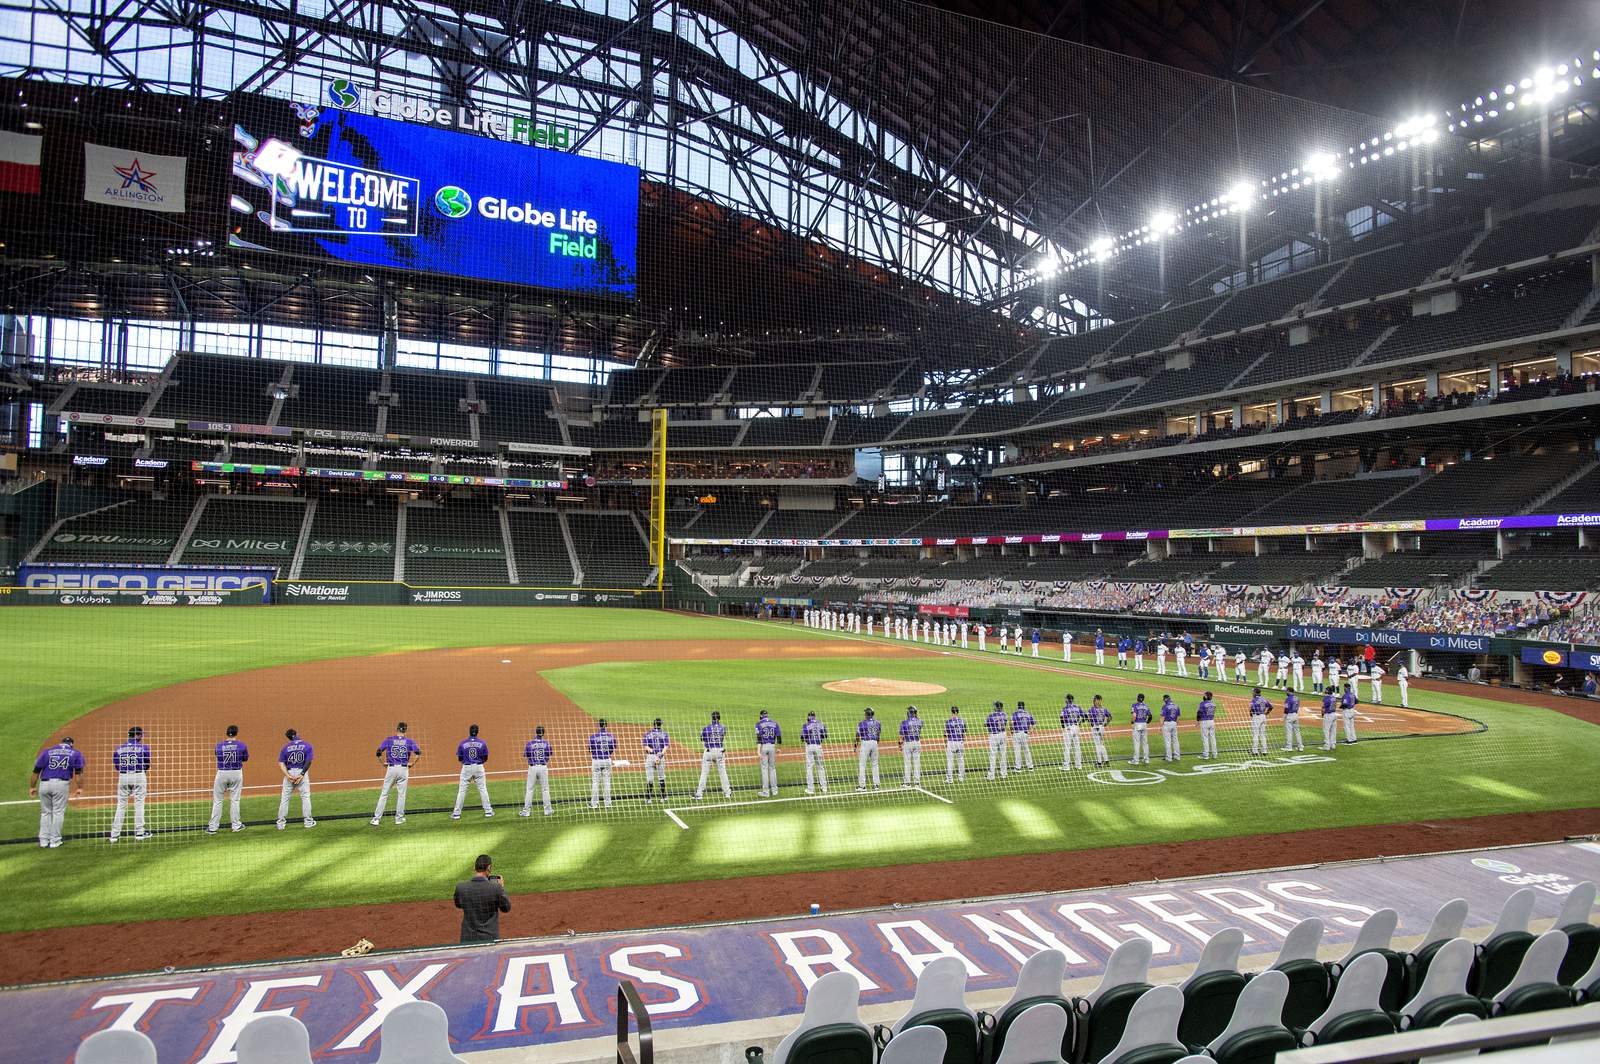 Texas Rangers in line to be first MLB team back to full capacity